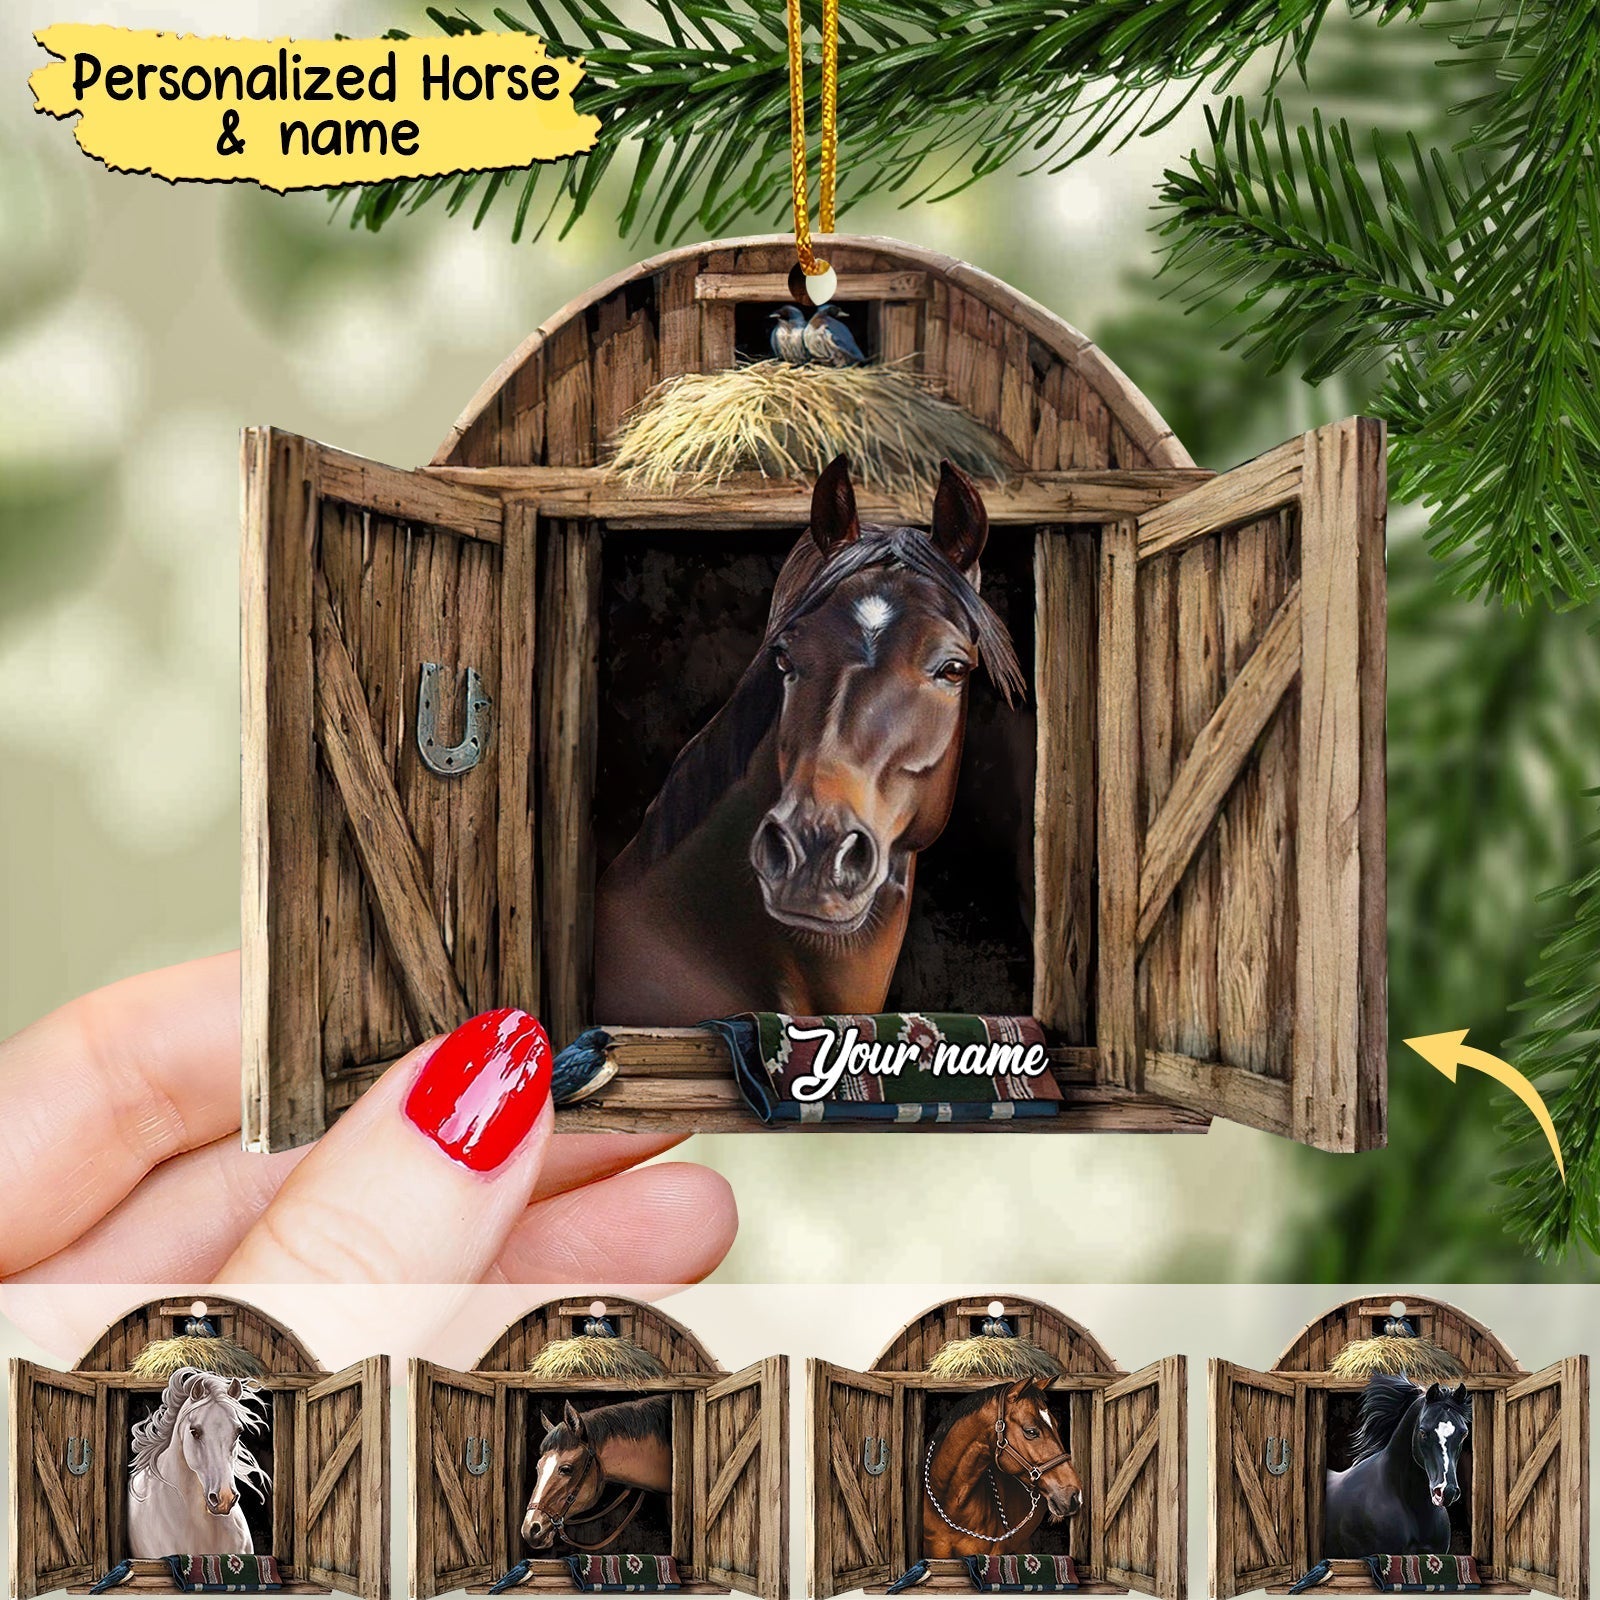 Country Horses On Farm, Horse Breeds Custom Name Personalized Ornament